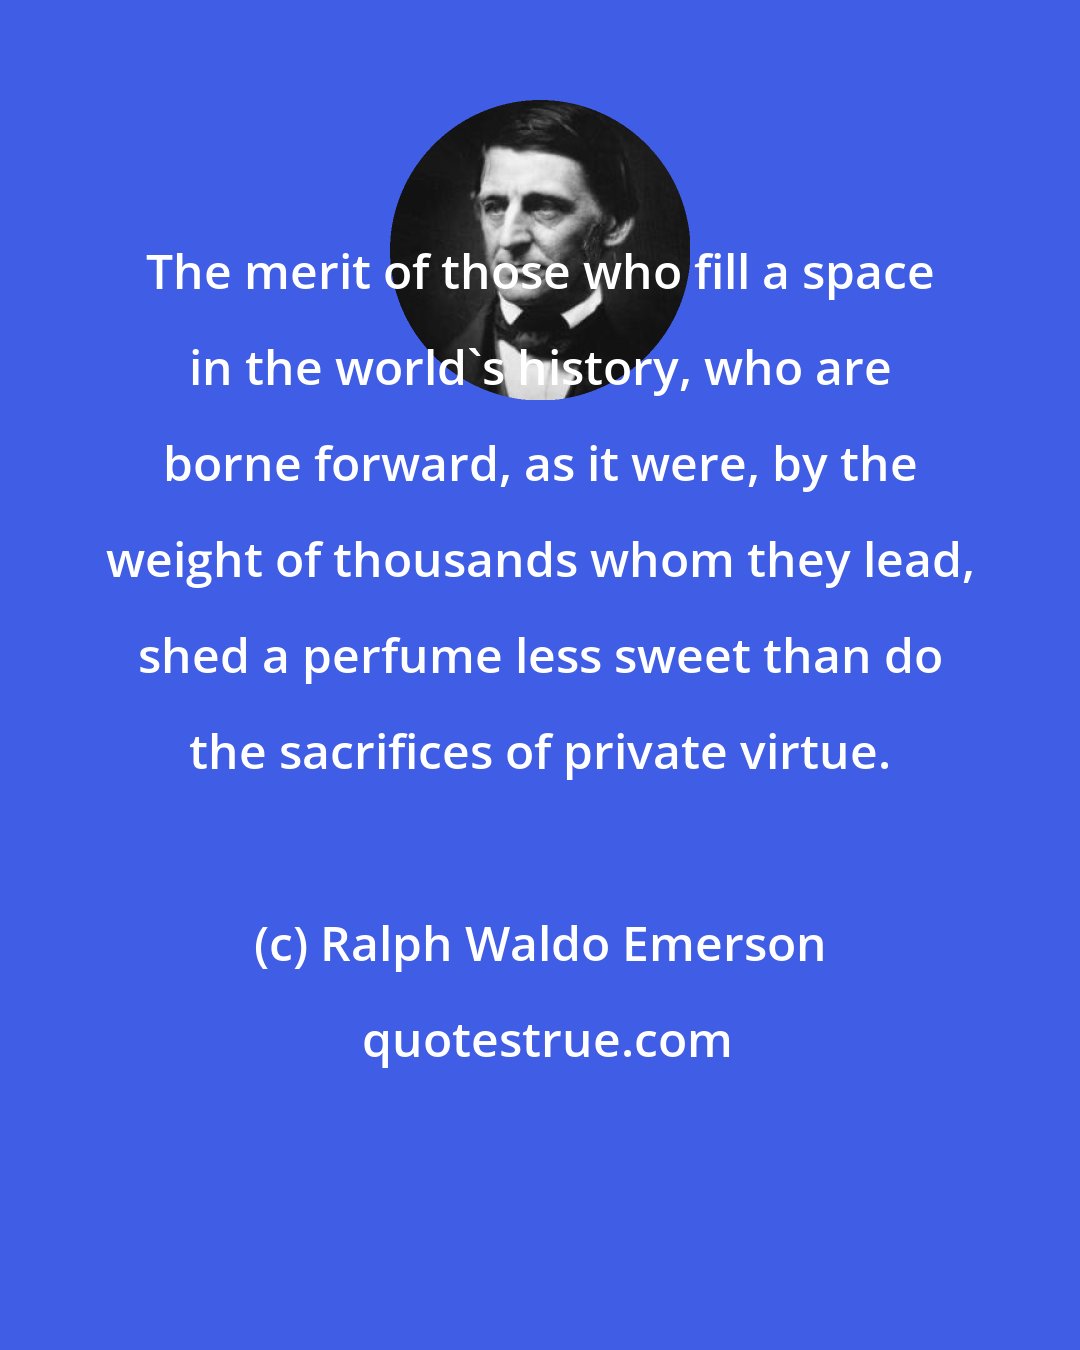 Ralph Waldo Emerson: The merit of those who fill a space in the world's history, who are borne forward, as it were, by the weight of thousands whom they lead, shed a perfume less sweet than do the sacrifices of private virtue.